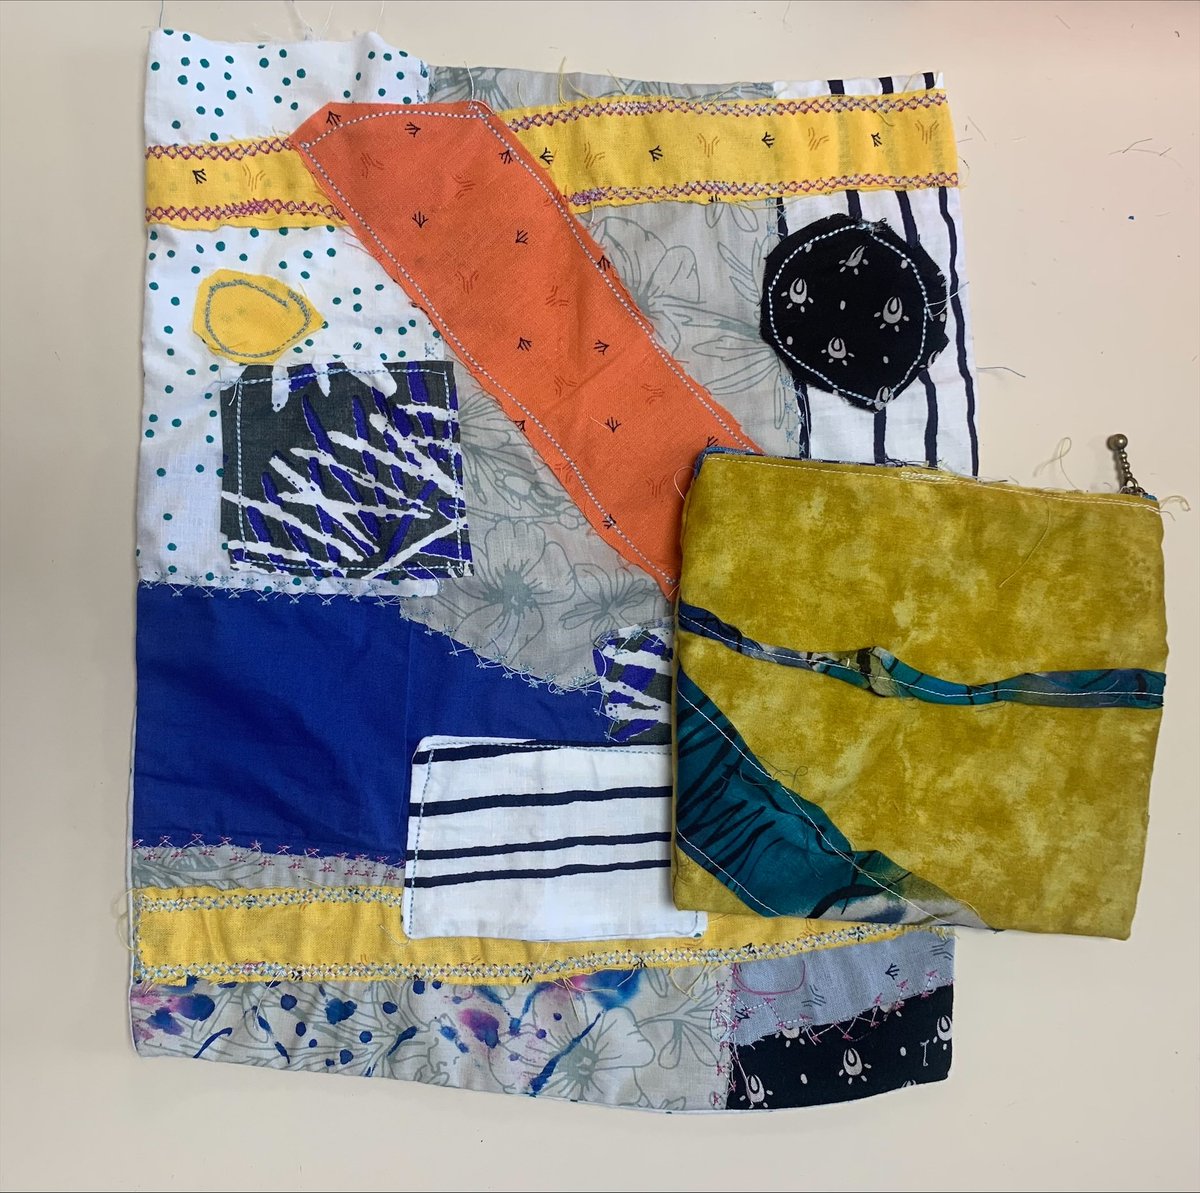 A Year 9 student making use of scrap fabrics to make new beautiful pieces at home. Lovely work. #PipersYear9 #PipersTextiles #PipersSenior